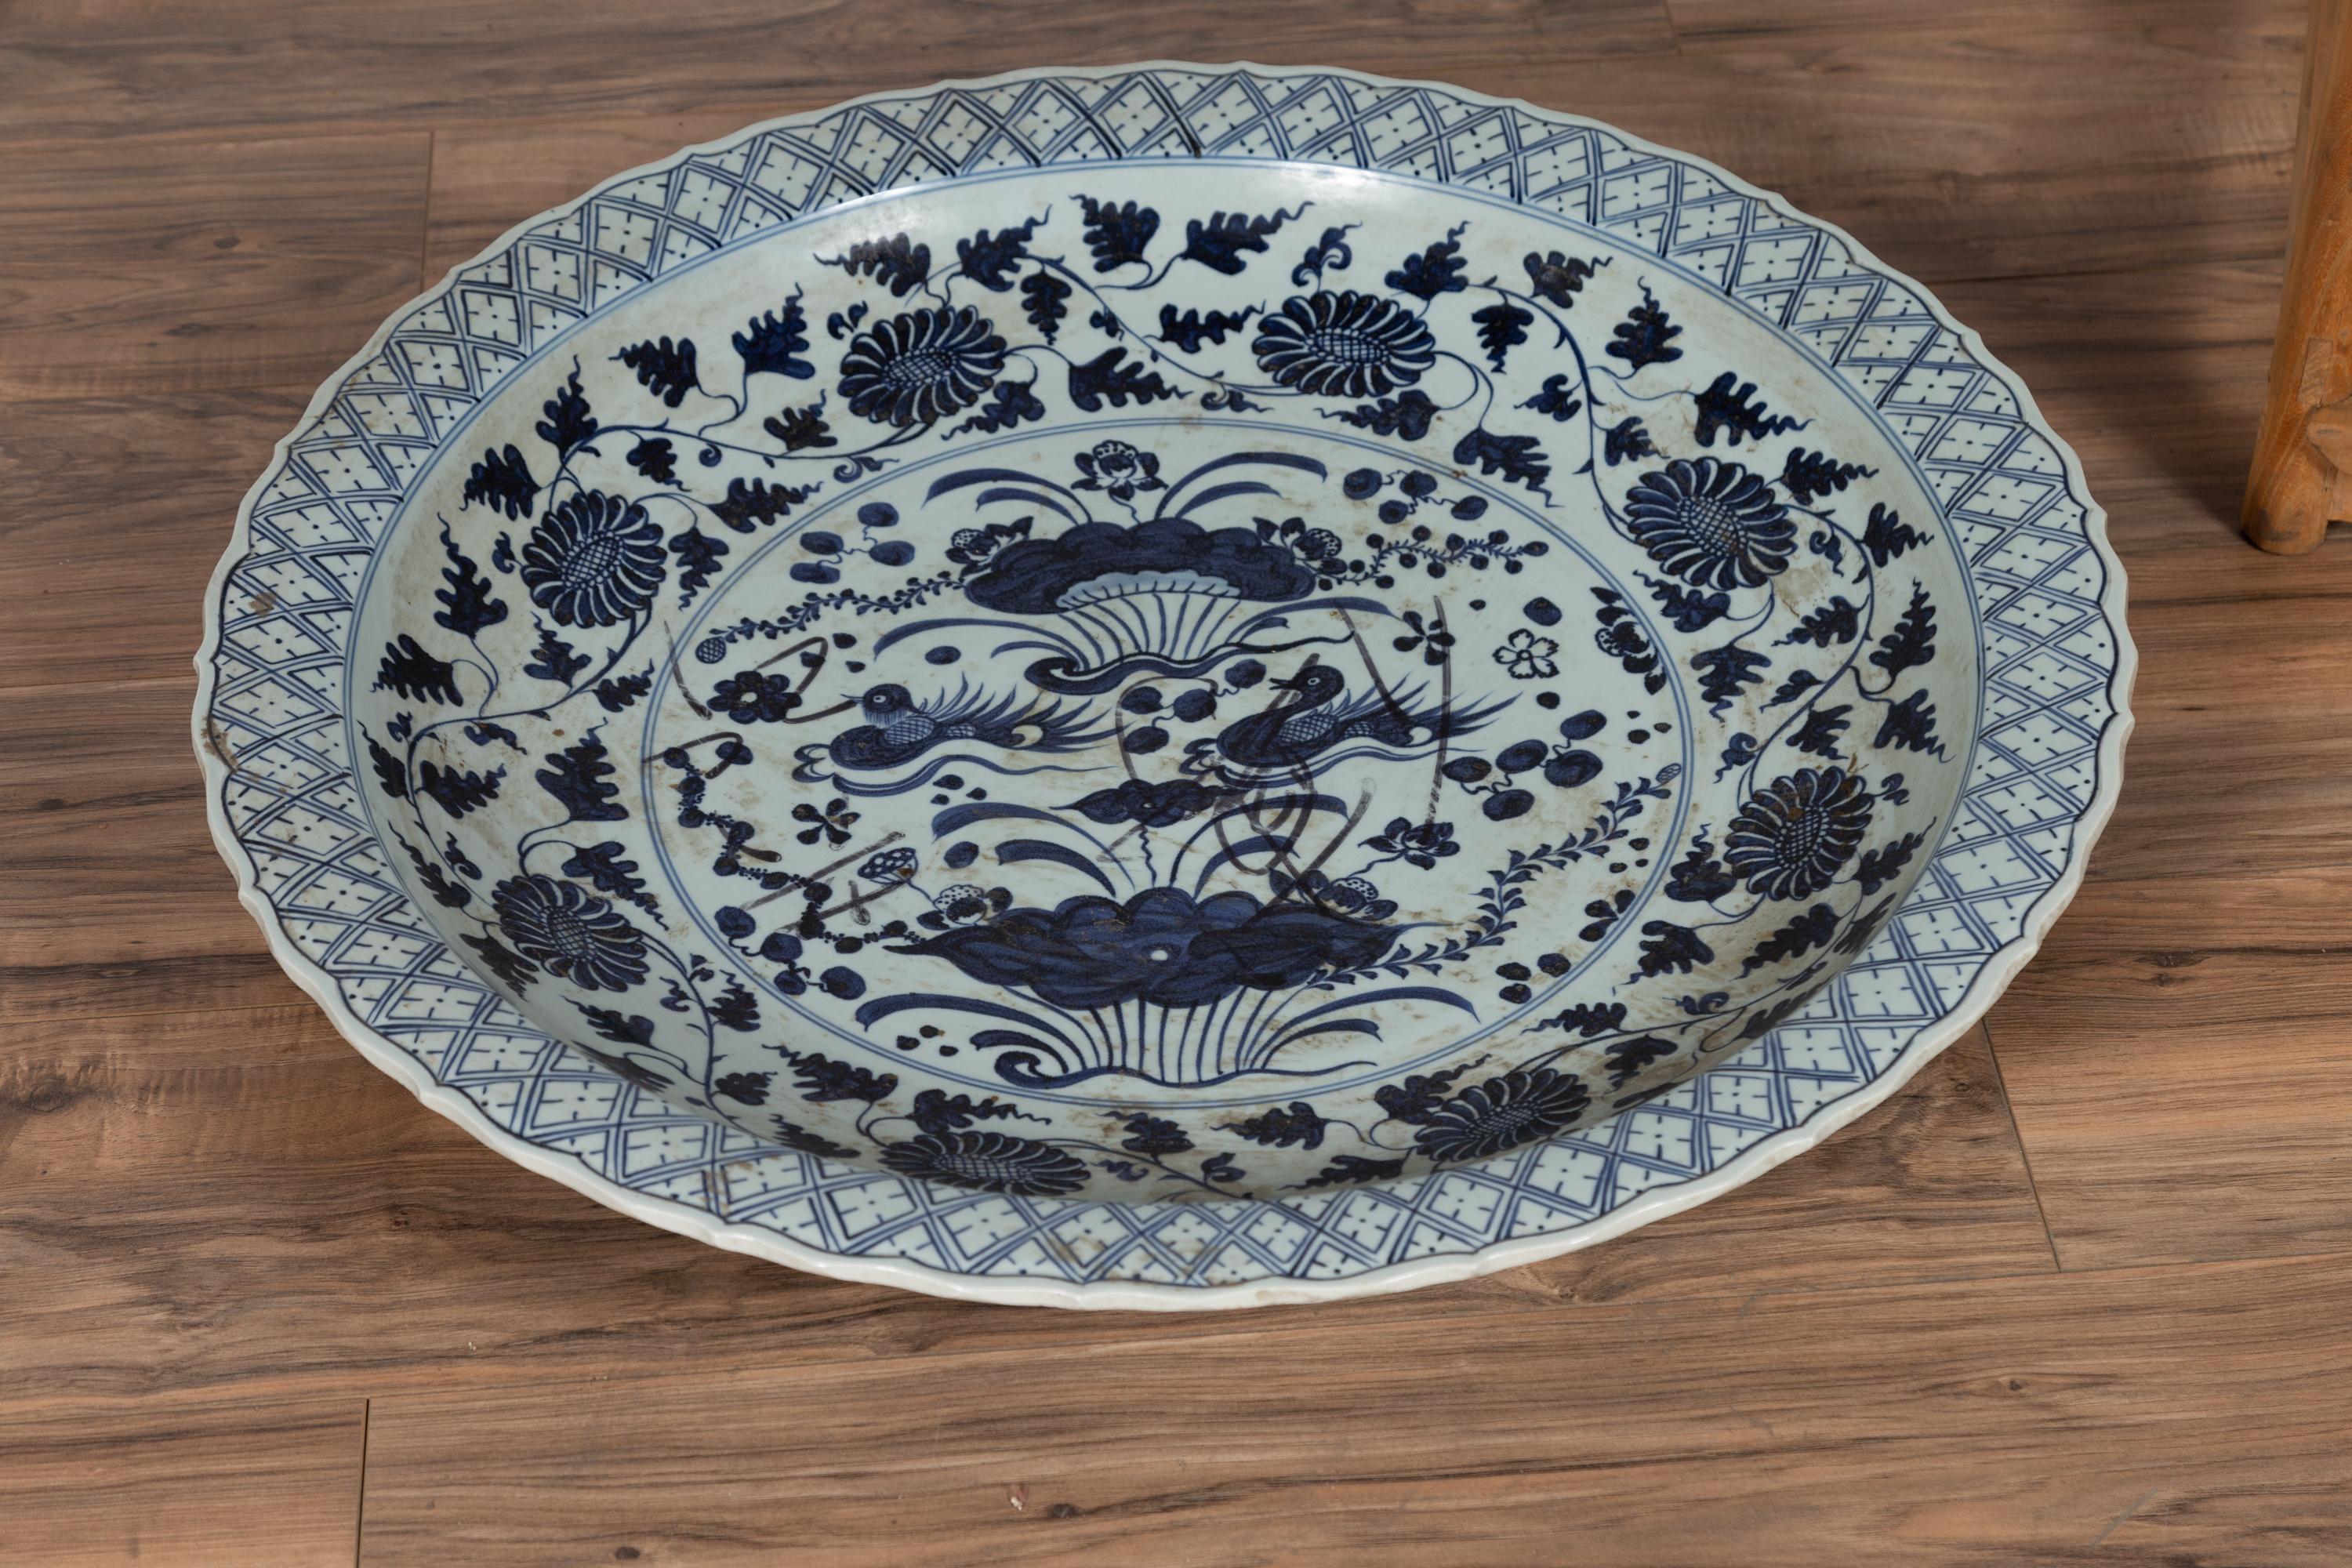 Large Chinese Vintage Blue and White Charger Plate with Flower and Bird Motifs 3